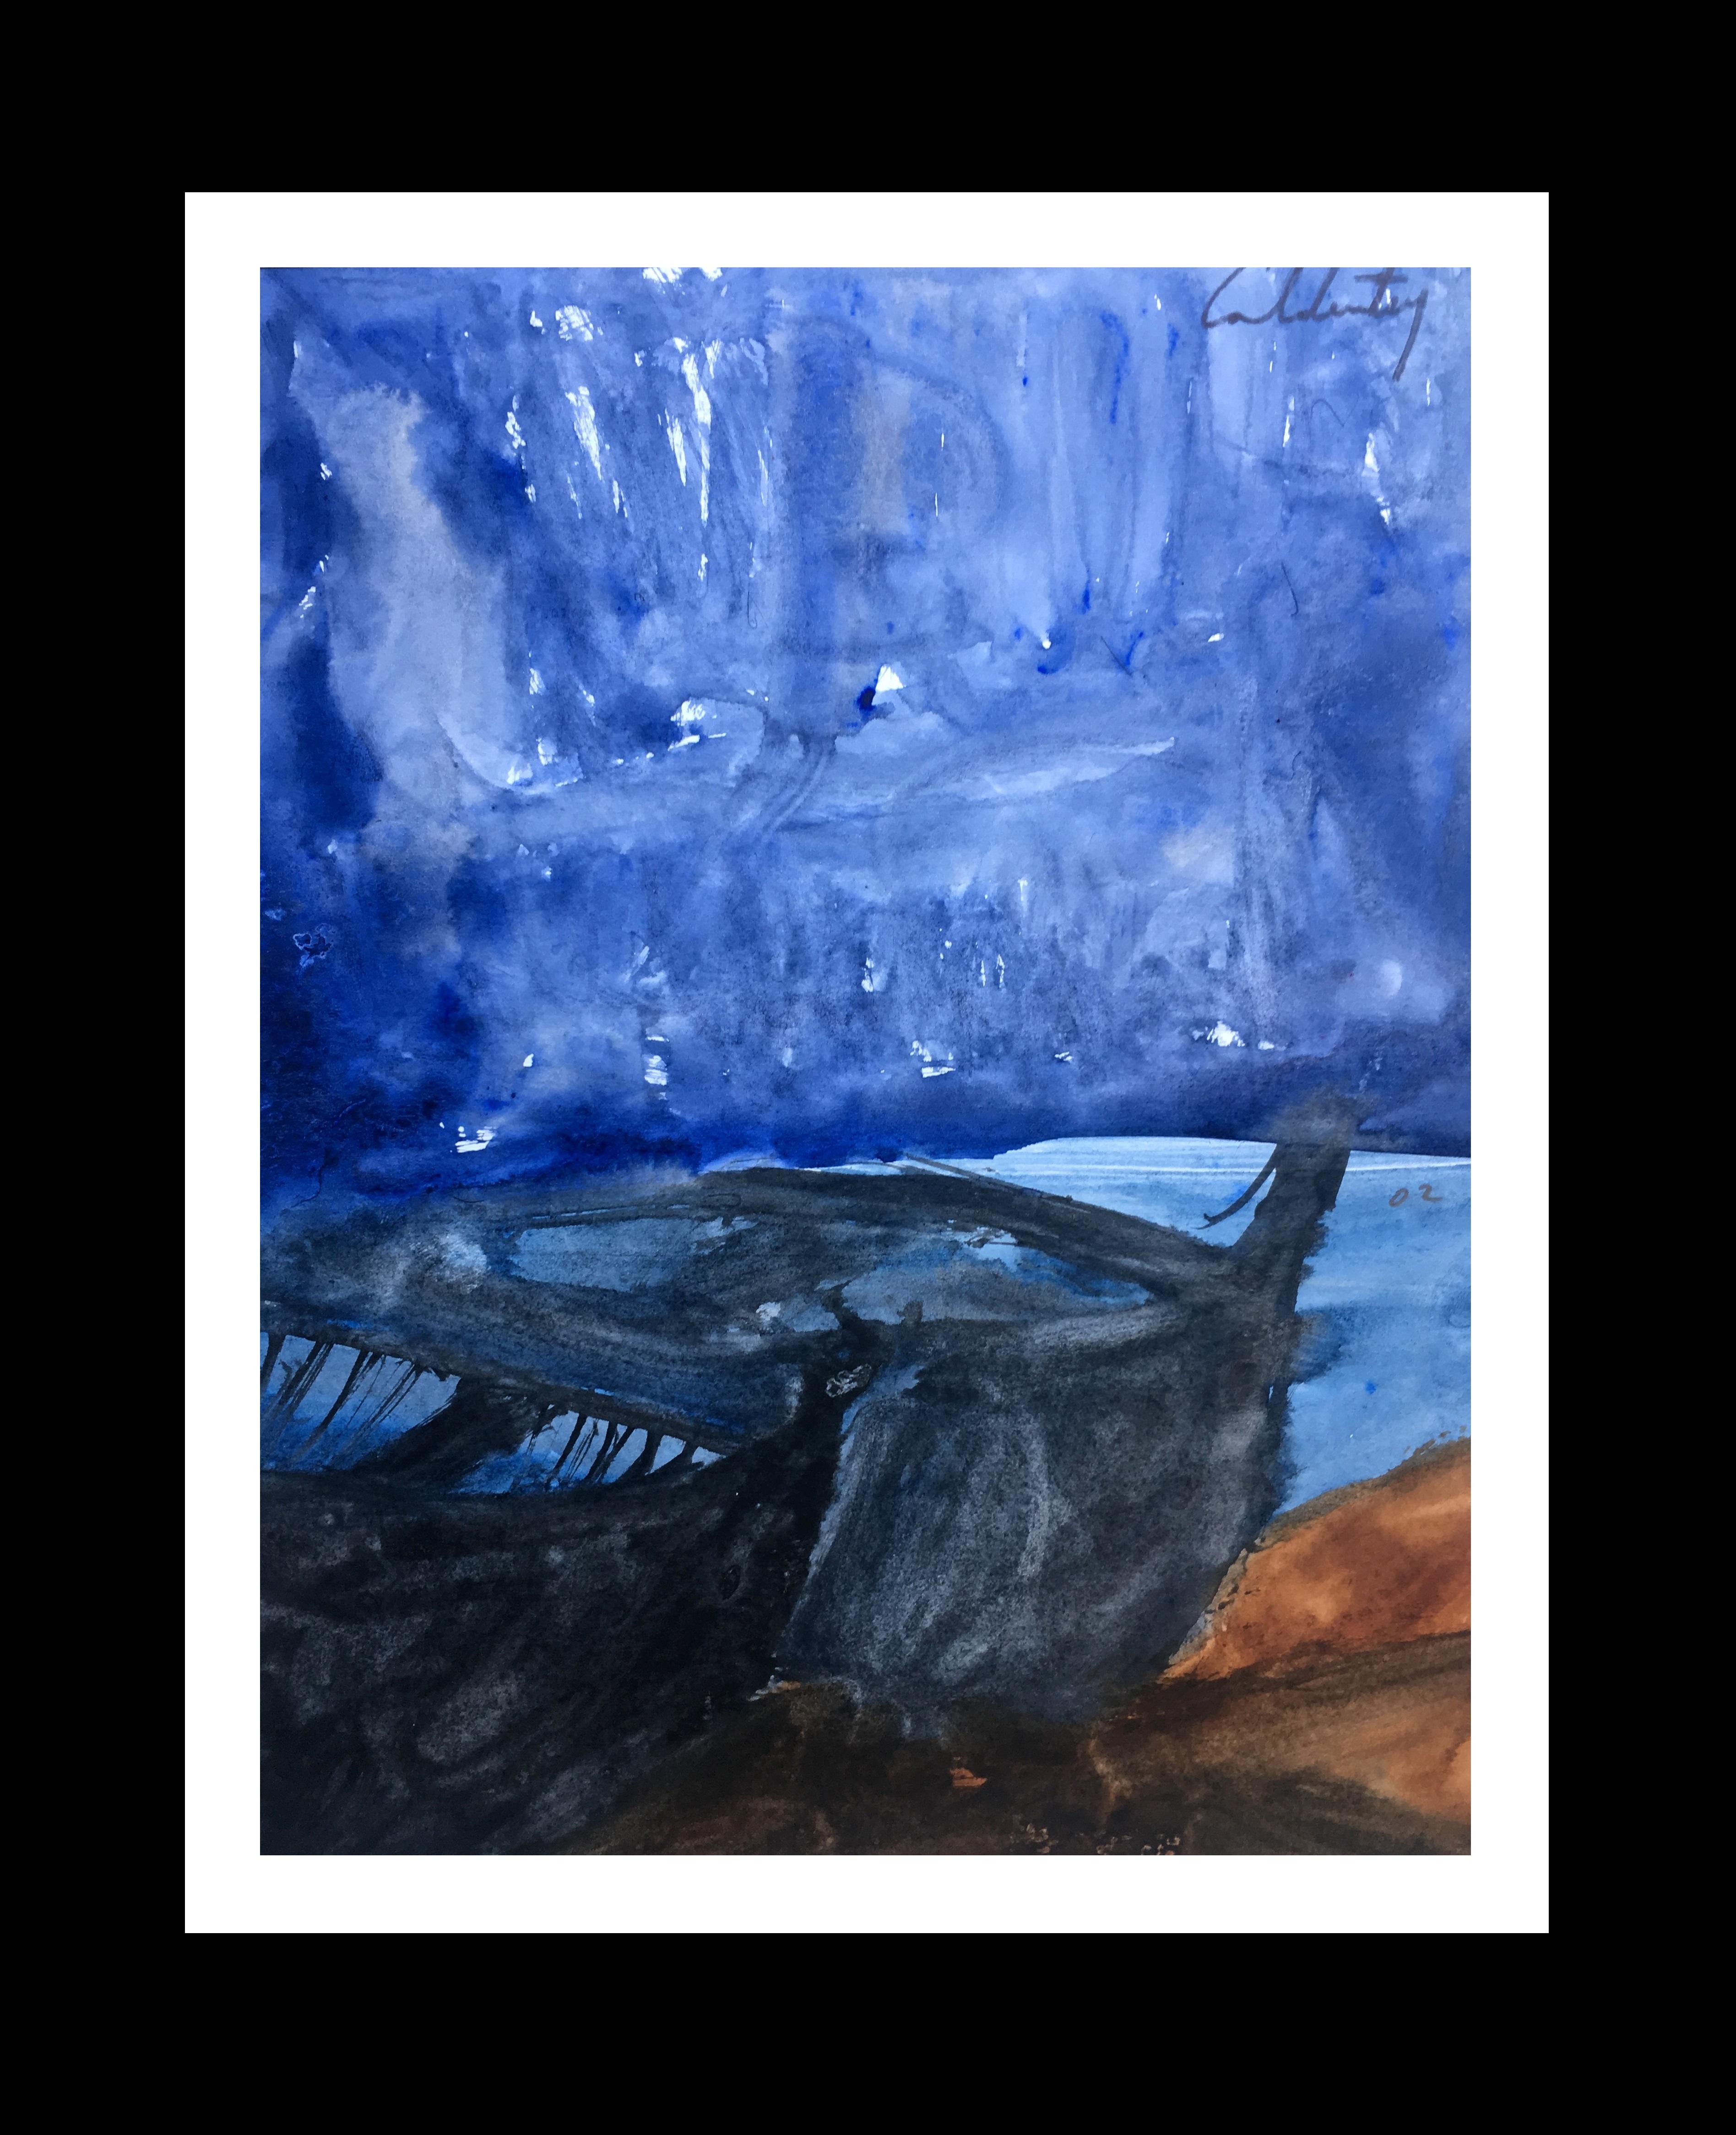  Caldentey  Vertical  Little  Blue  Boat  original neo-expressionist acrylic  - Painting by Toni CALDENTEY